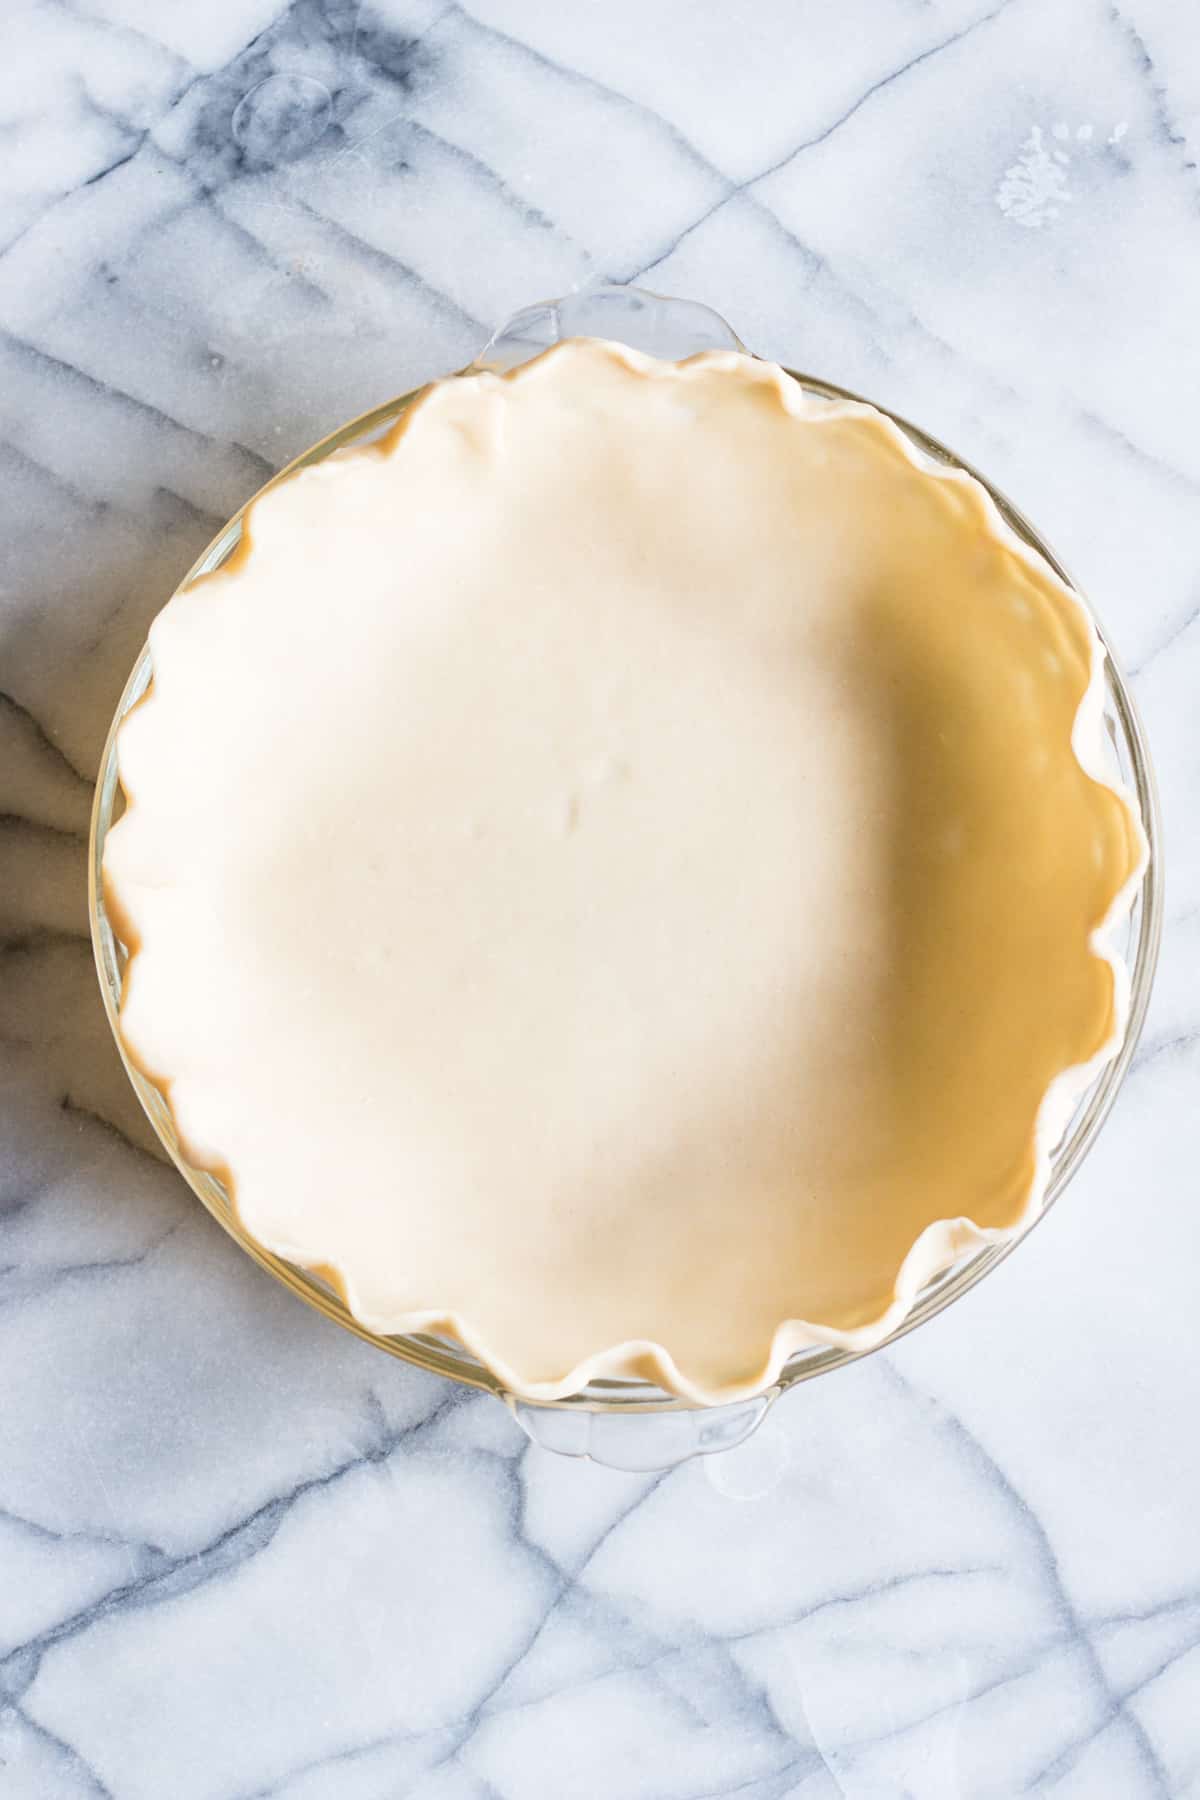 An uncooked pie crust in a glass pie dish. First steps to make a quiche.